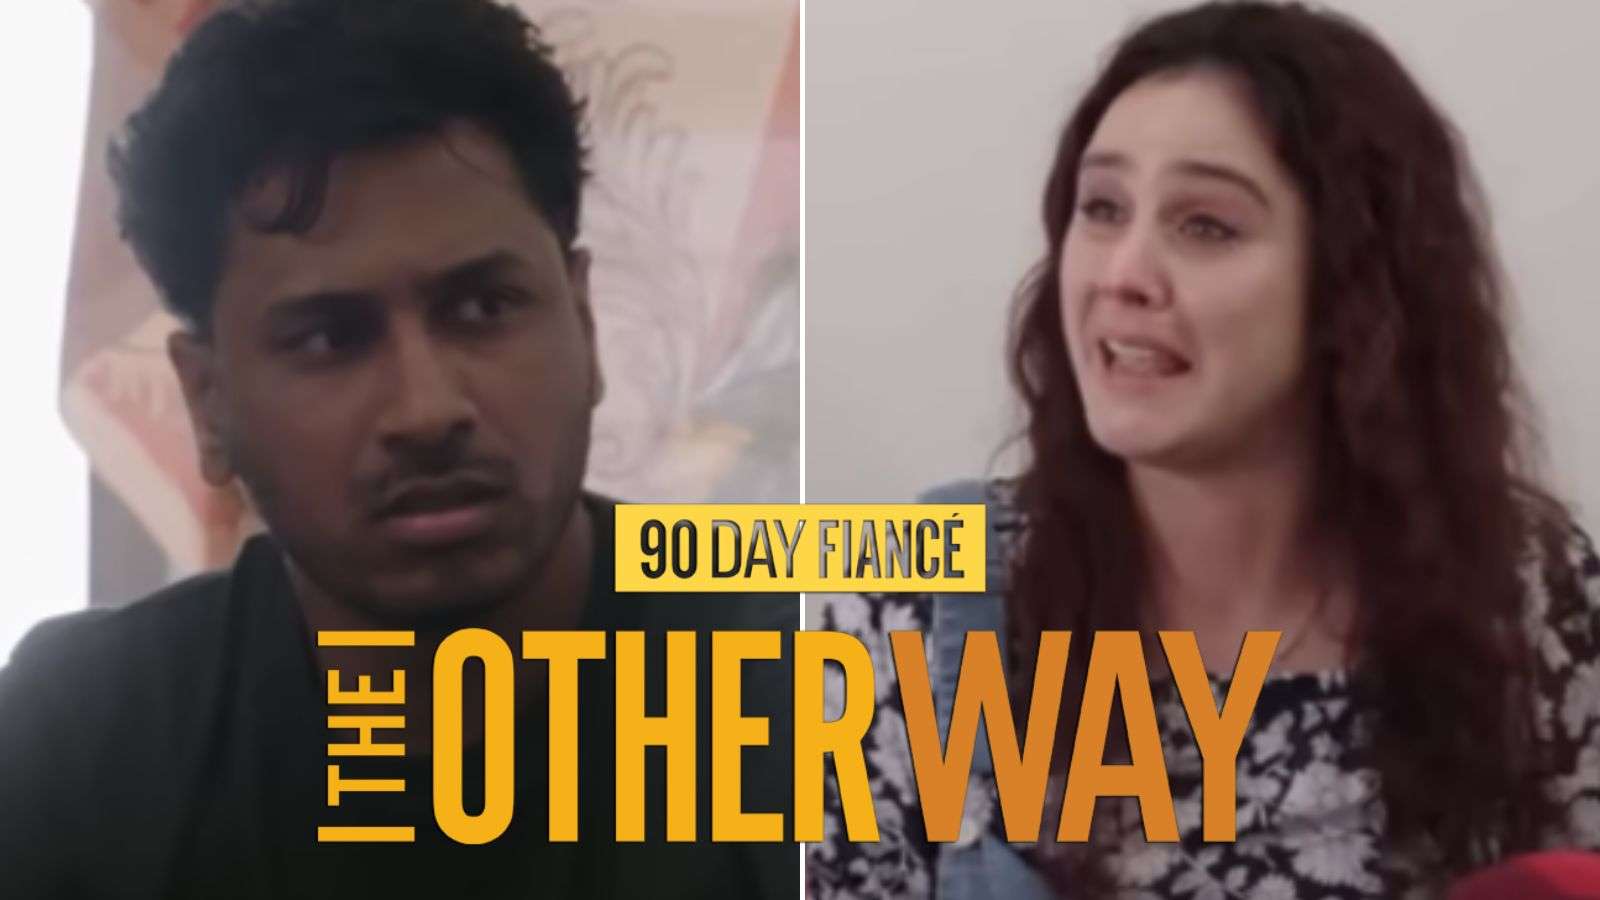 Kimberly and Tejaswi from 90 Day Fiancé: The Other Way